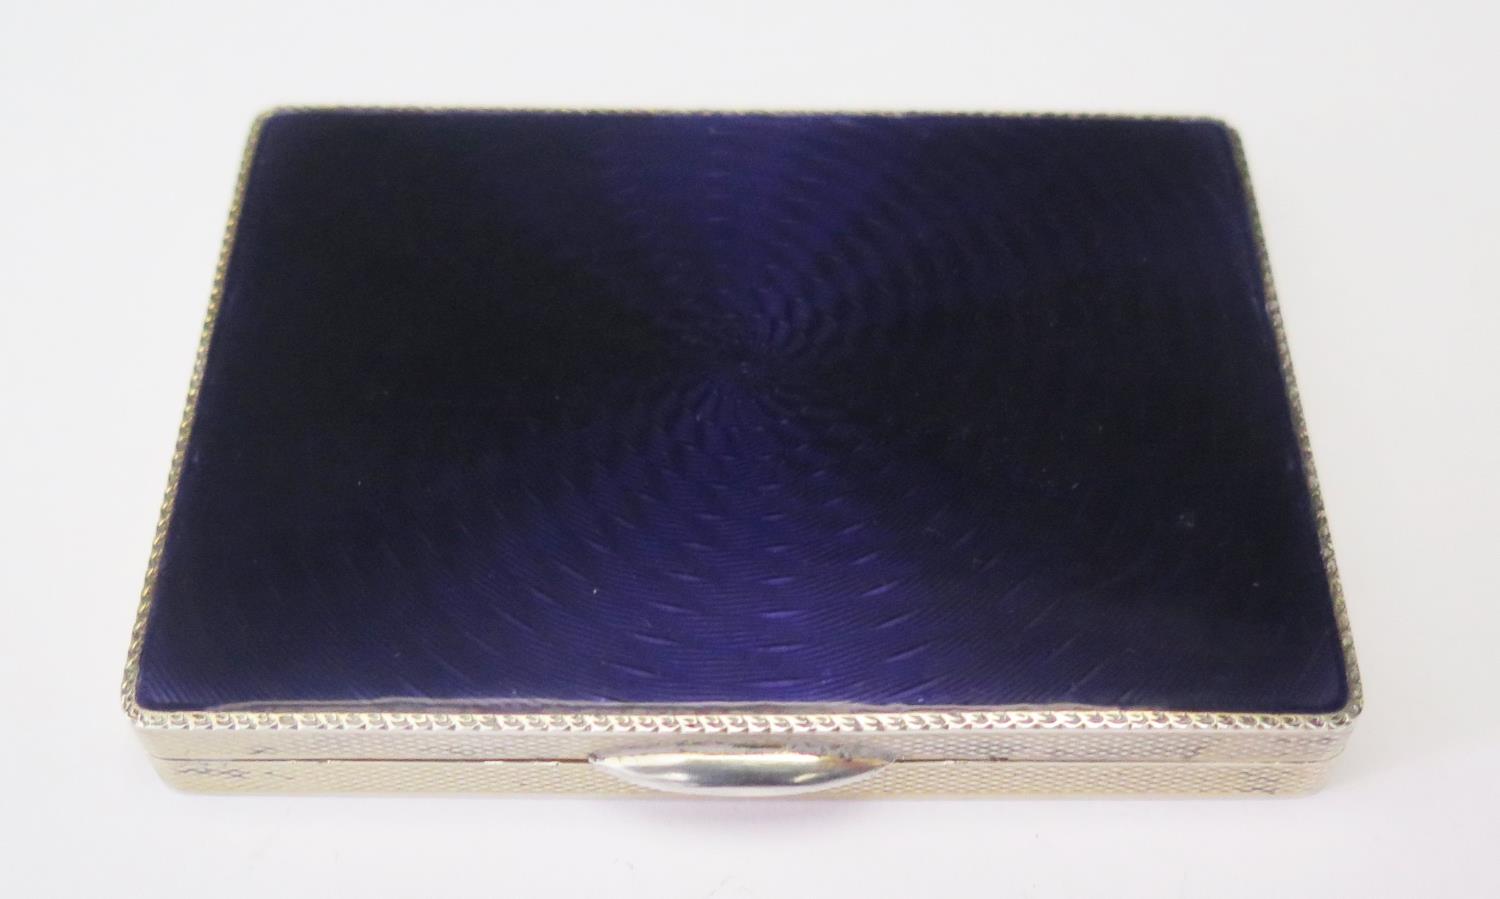 An Asprey Silver and Amethyst Guilloché Enamel Box with engine turned decoration, London 1931, 8x5.